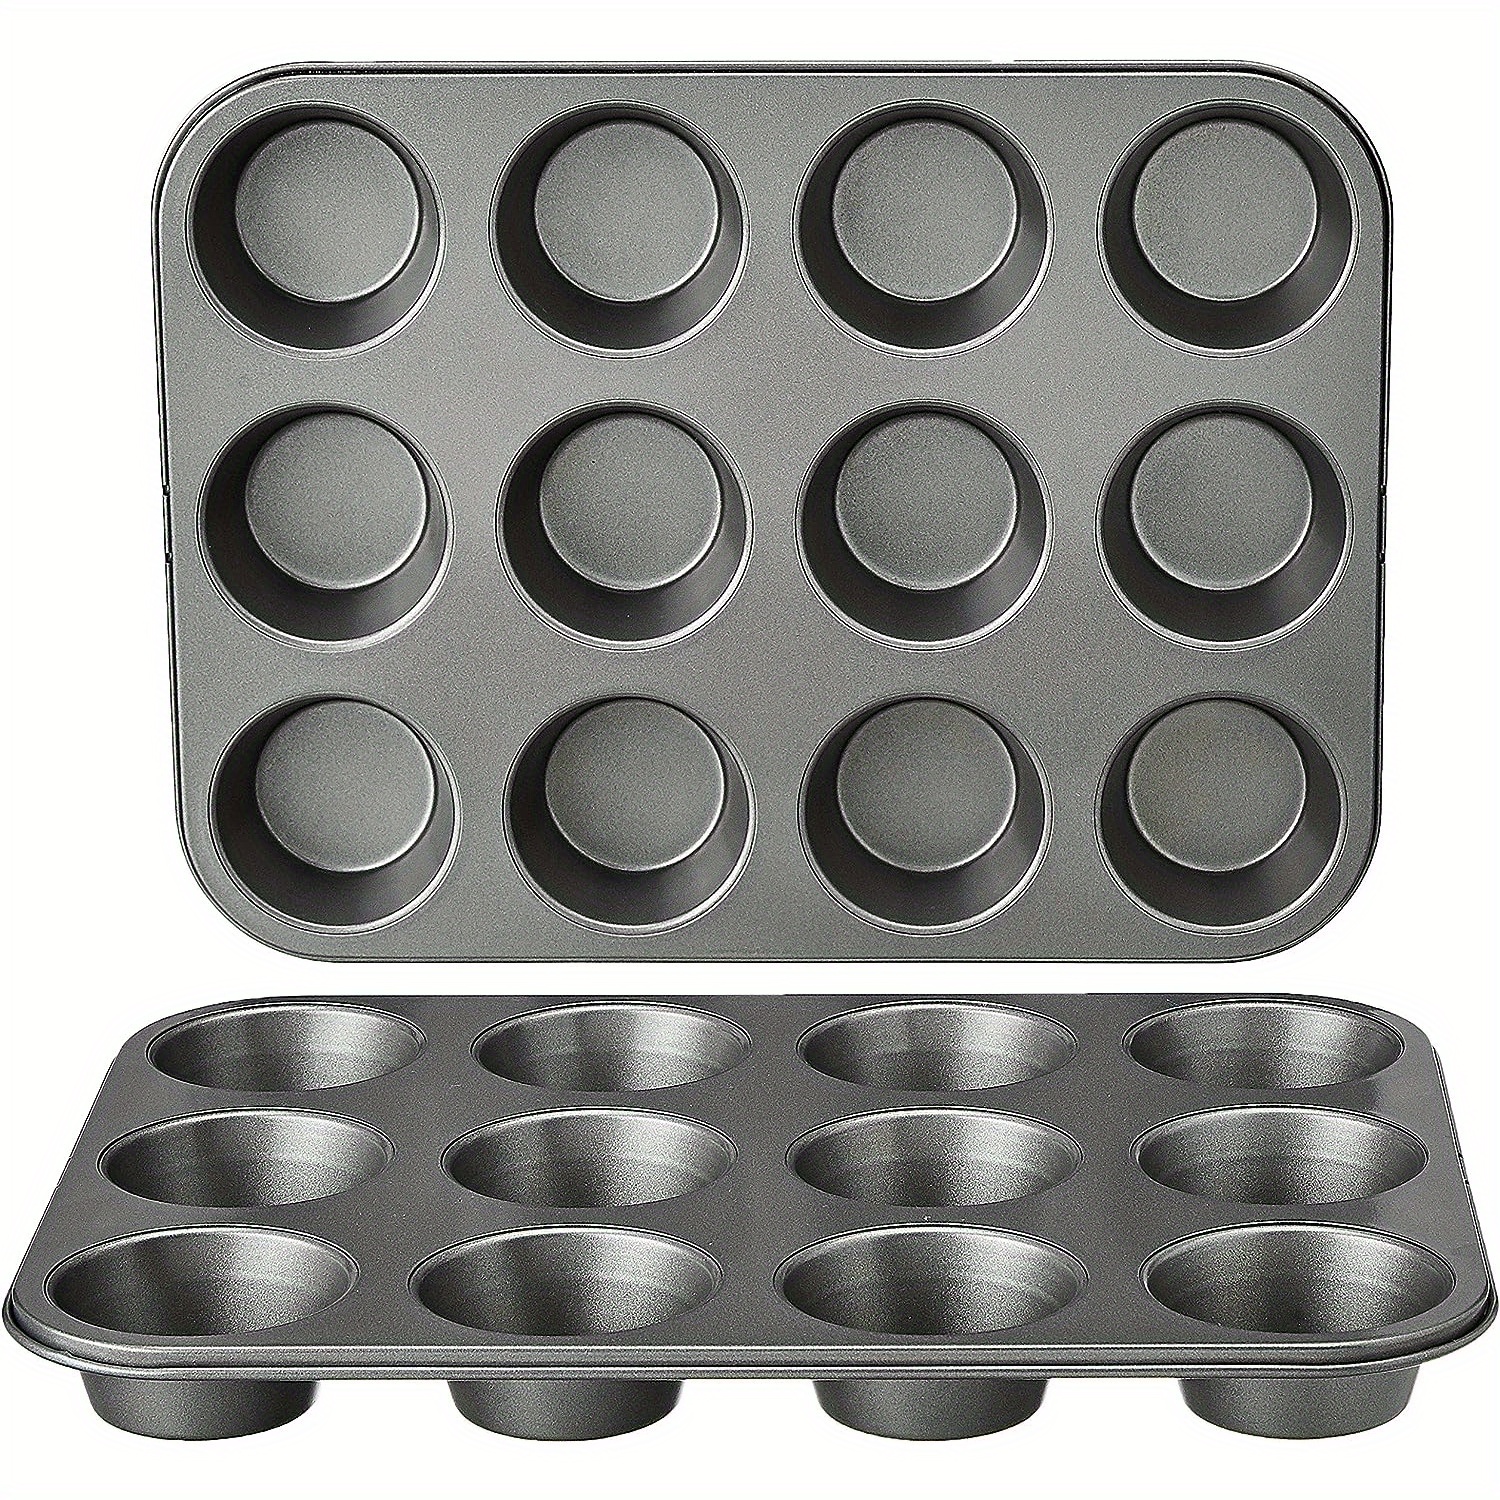 4 Cup Muffin Pan Mold - Non-Stick Cupcake Baking Tray/Tin - Carbon Steel  Cake Mould For home, cafe bar and restaurant (Black)